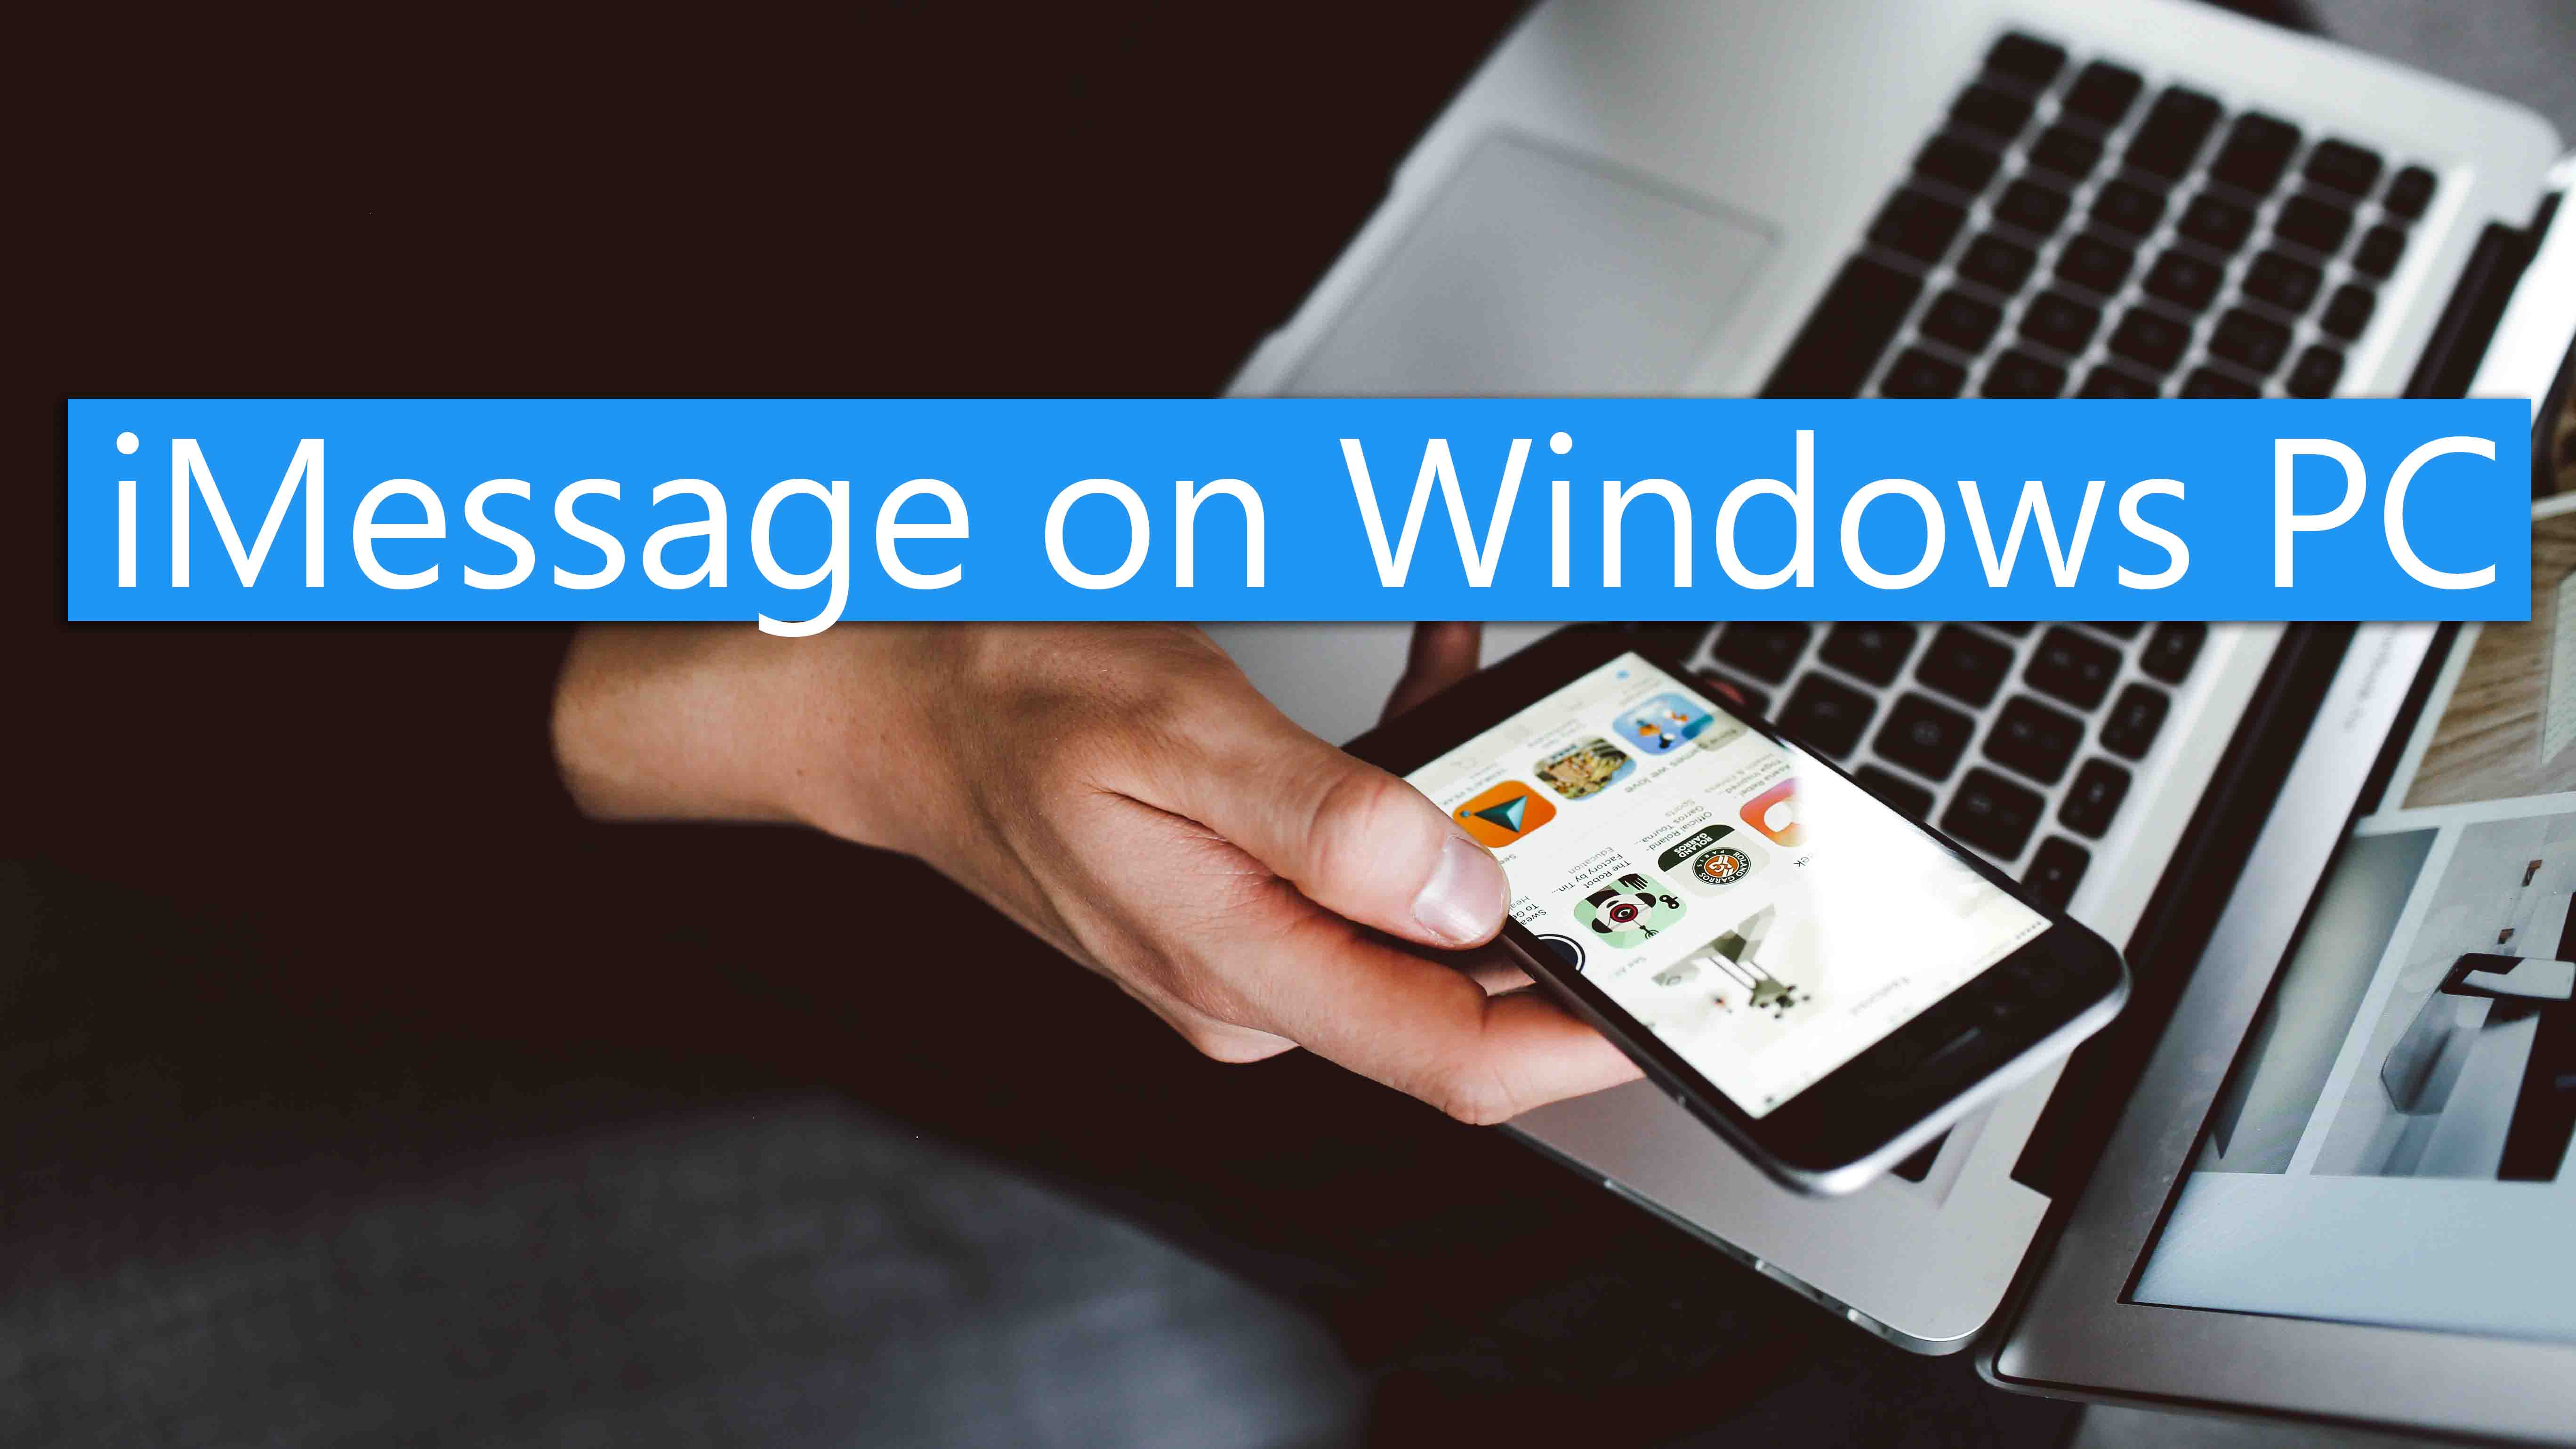 How to use iMessage on Windows PC